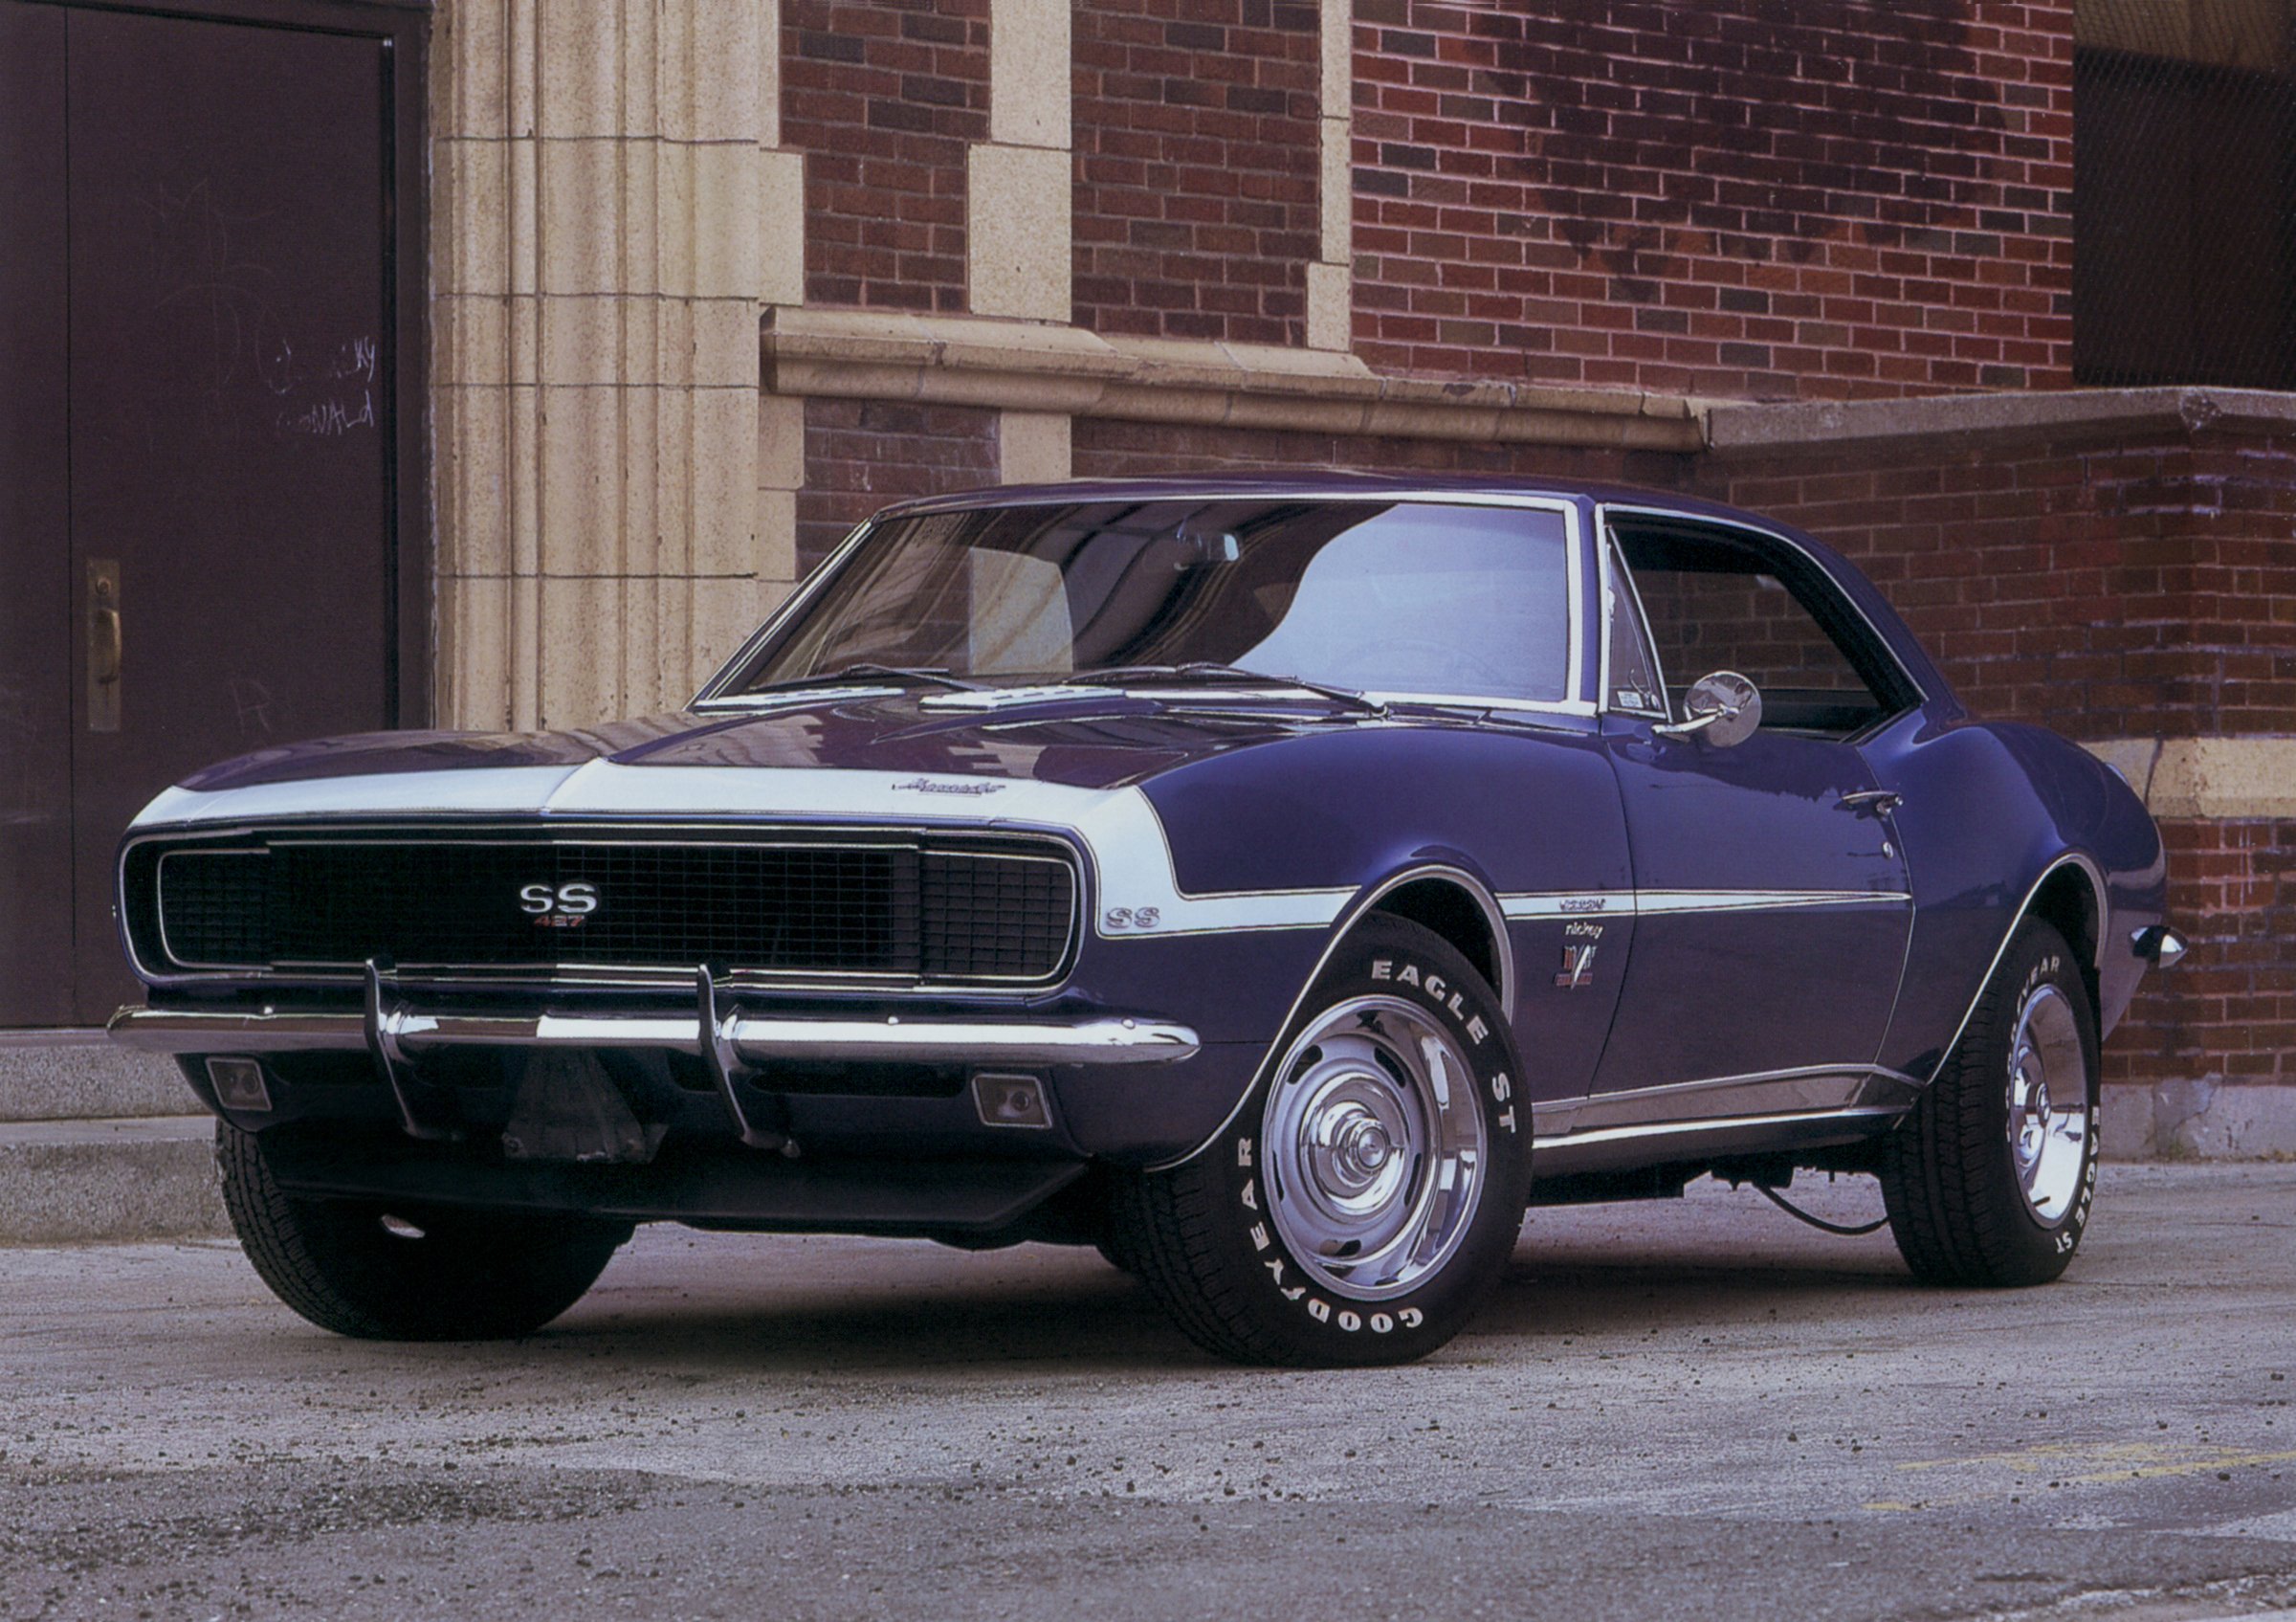 1967, Nickey, Chevrolet, Camaro, R s, S s, 427, Muscle, Classic Wallpaper